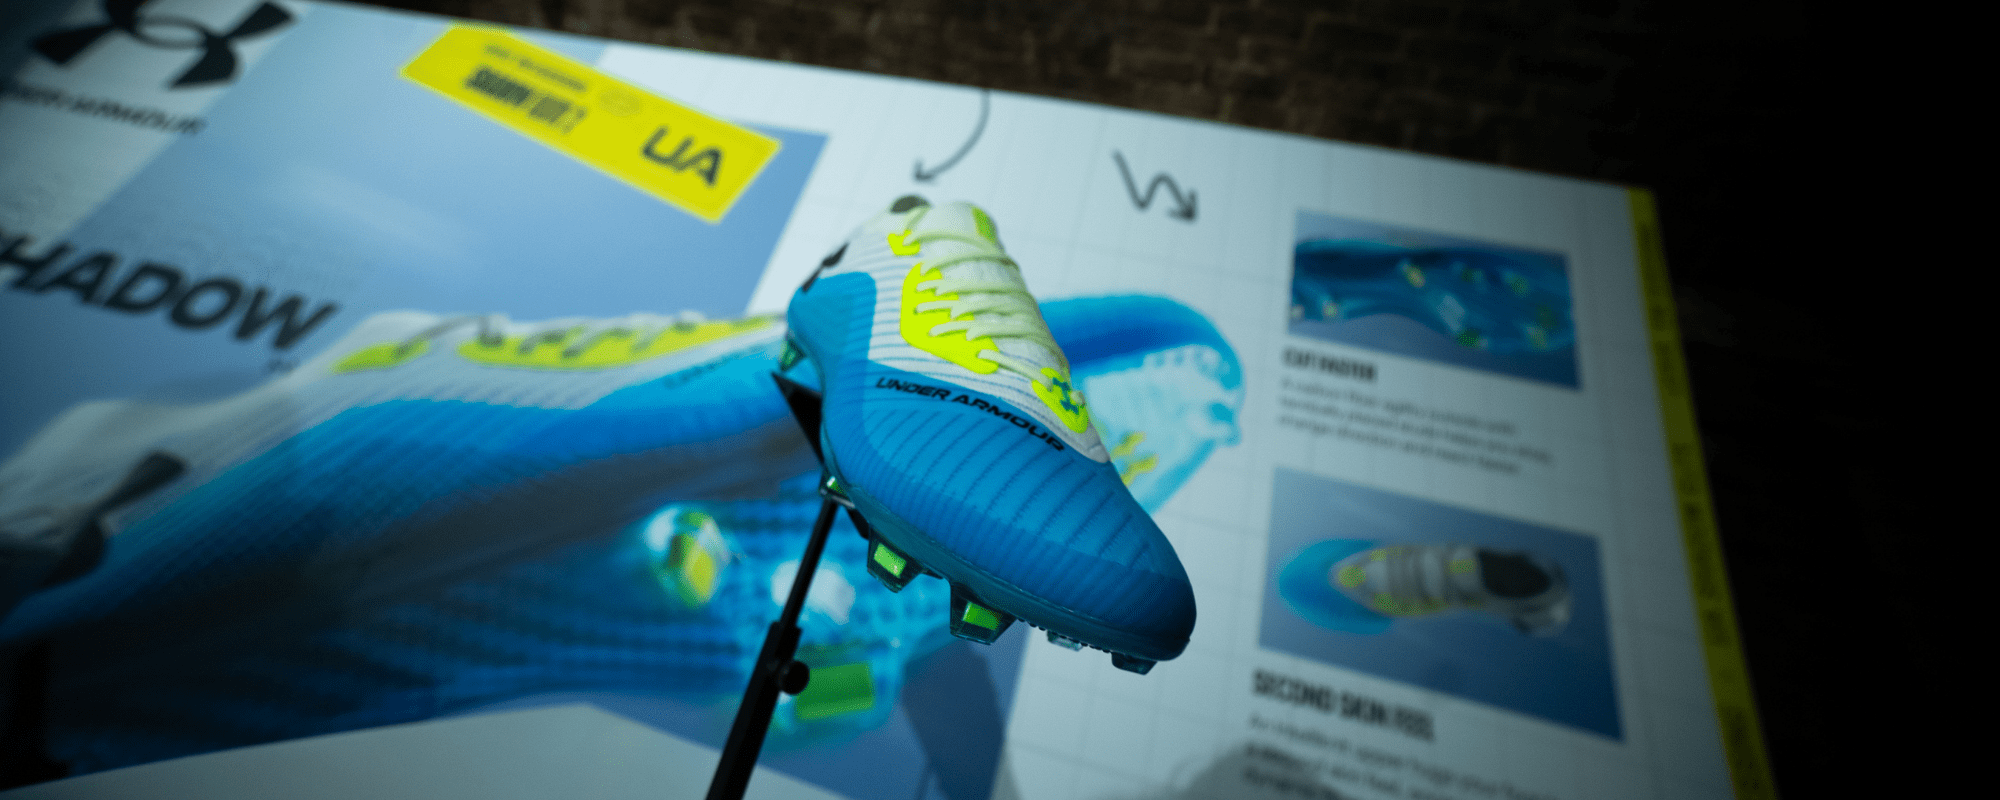 under-armour-launch-event-football-boot